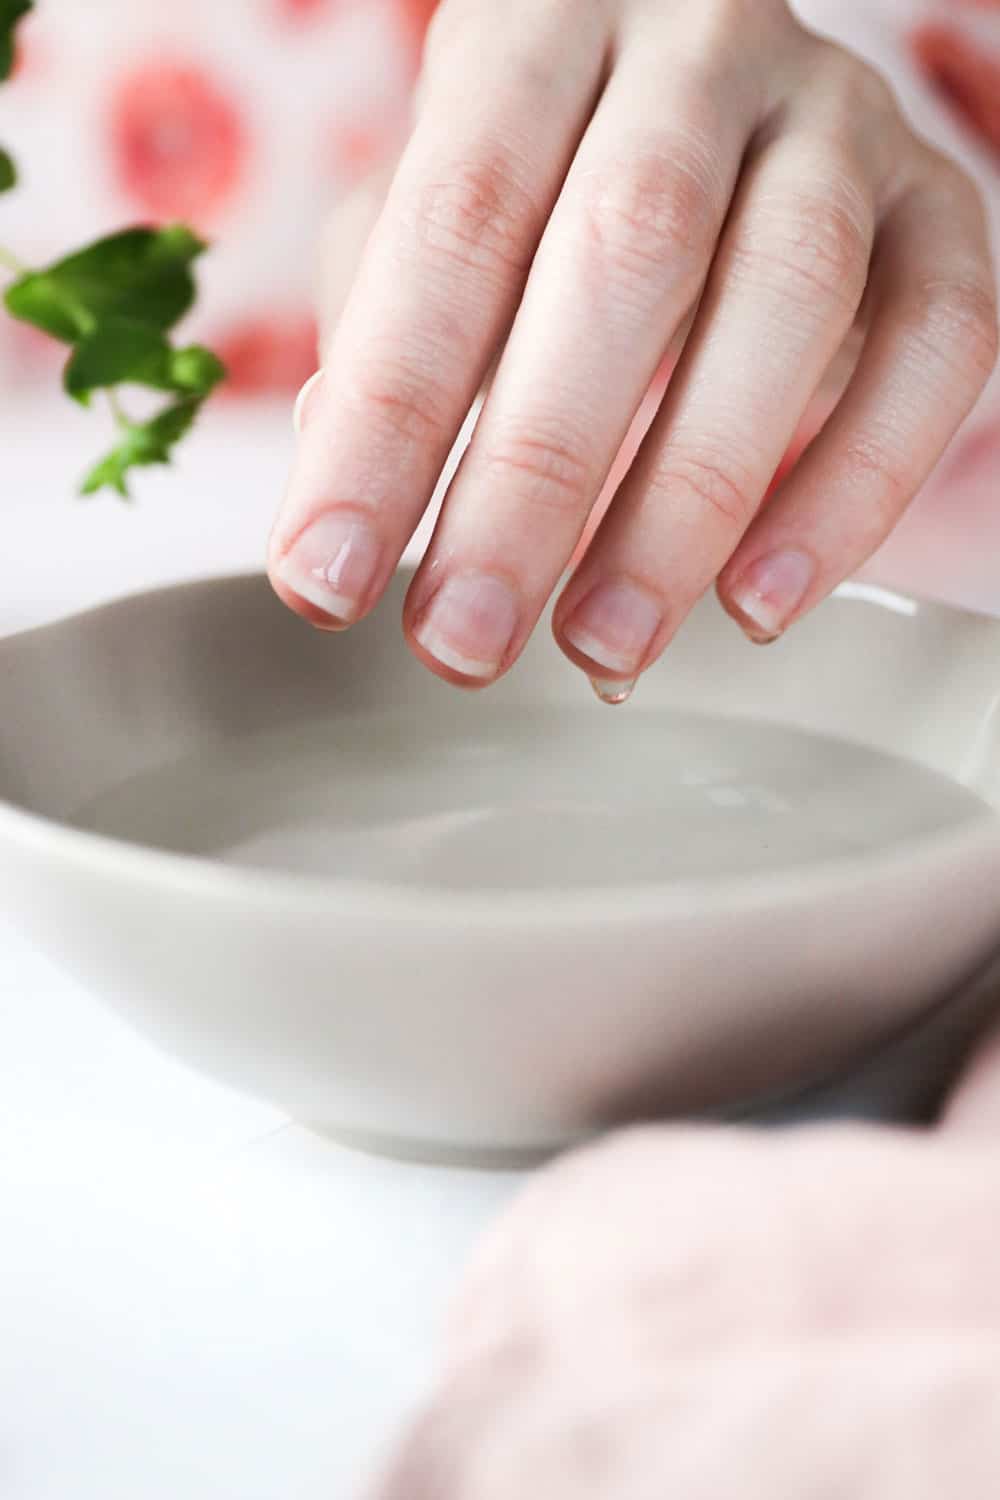 How to do a natural manicure at home